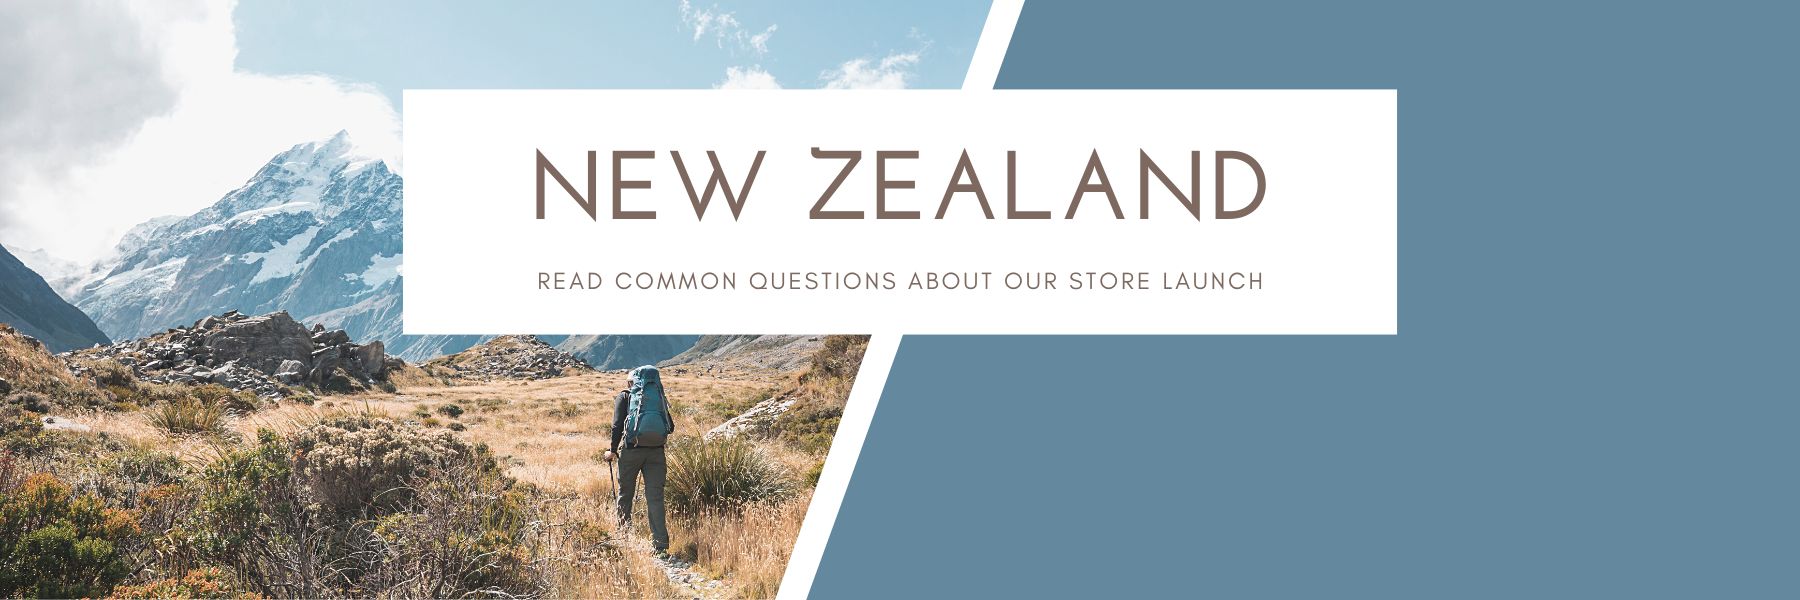 Frequently asked questions about plywood supplier Plyco's launch in New Zealand